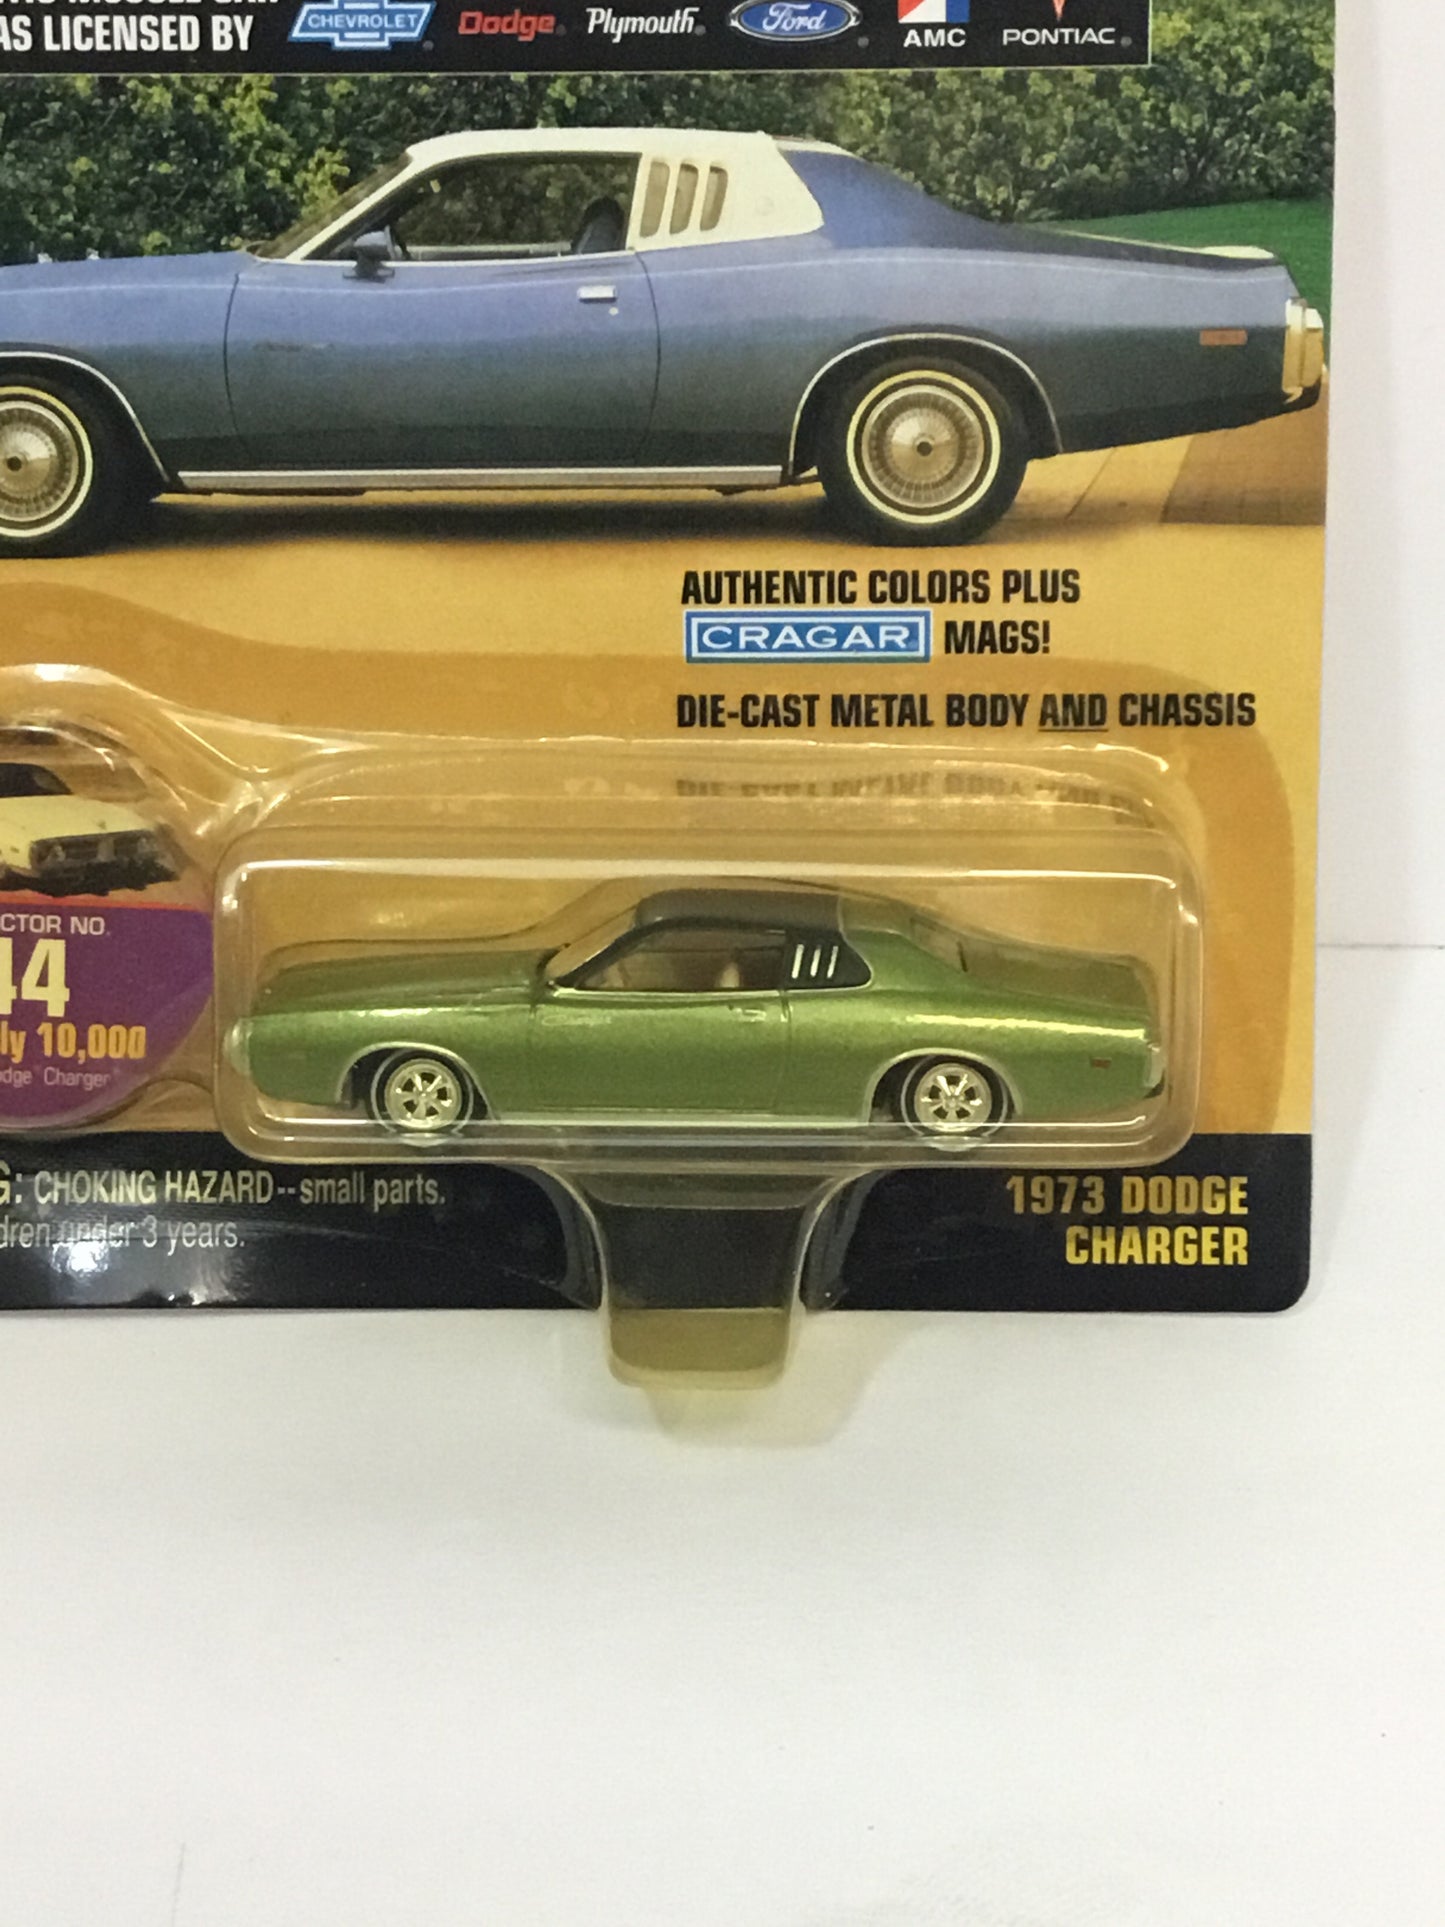 Johnny Lightning Muscle cars USA 1973 Dodge Charger. VHTF green (6B3)